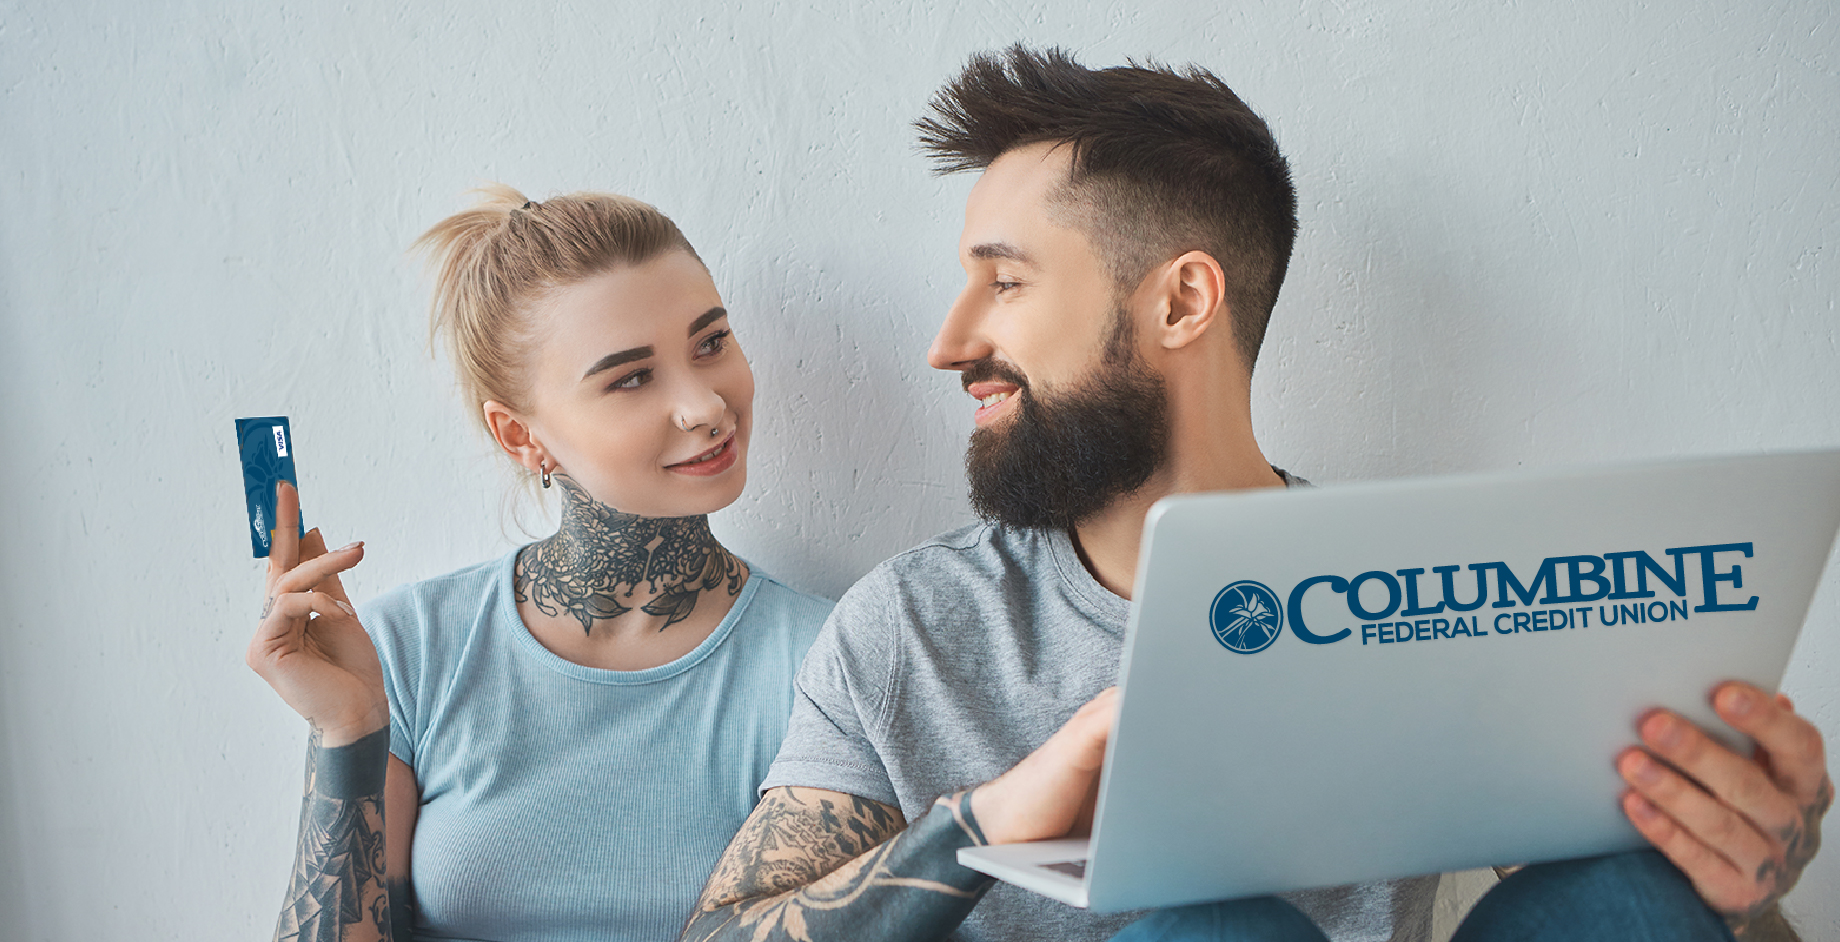 tattooed couple with credit card on computer with logo emblazoned